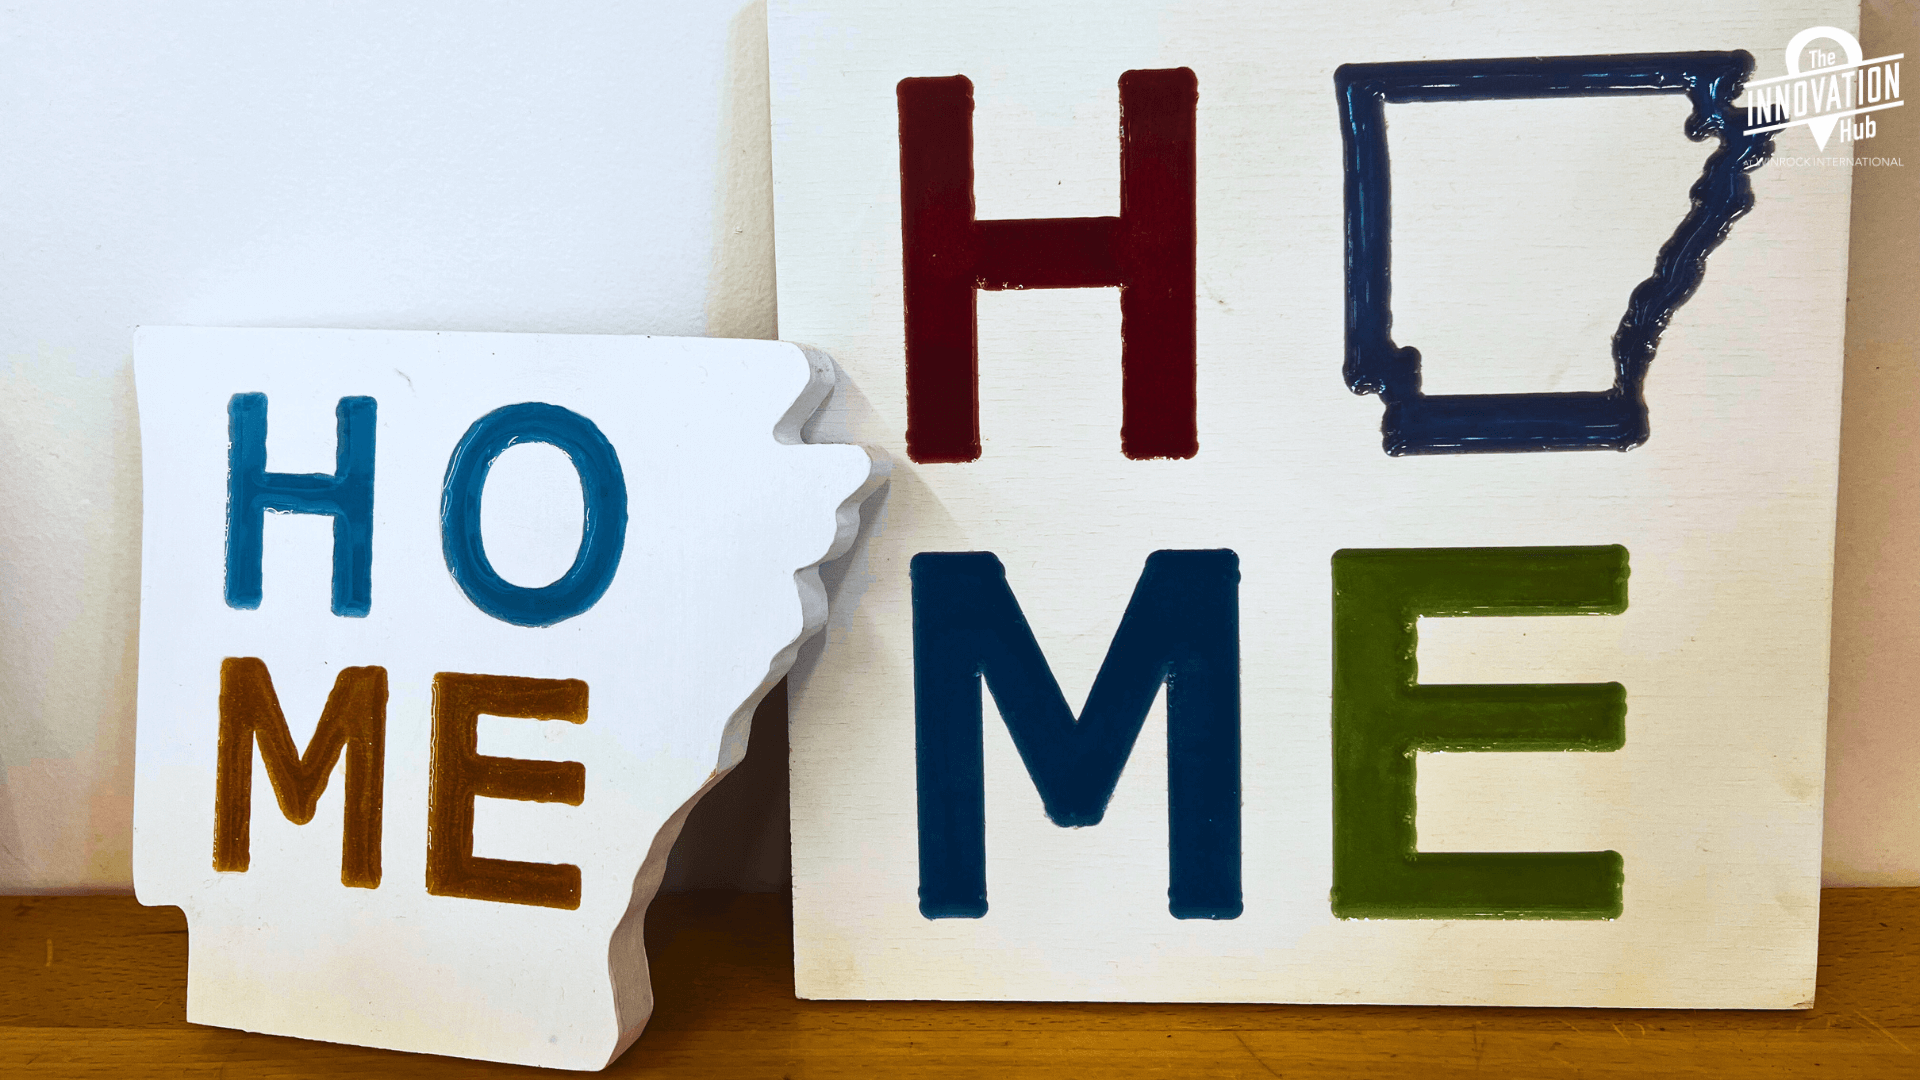 A photo of two different signs. The sign on the left is in the shape of Arkansas and says "HOME" in different color epoxies. The sign on the right is square and says "HOME" with the O as a shape of Arkansas and has colorful epoxies.